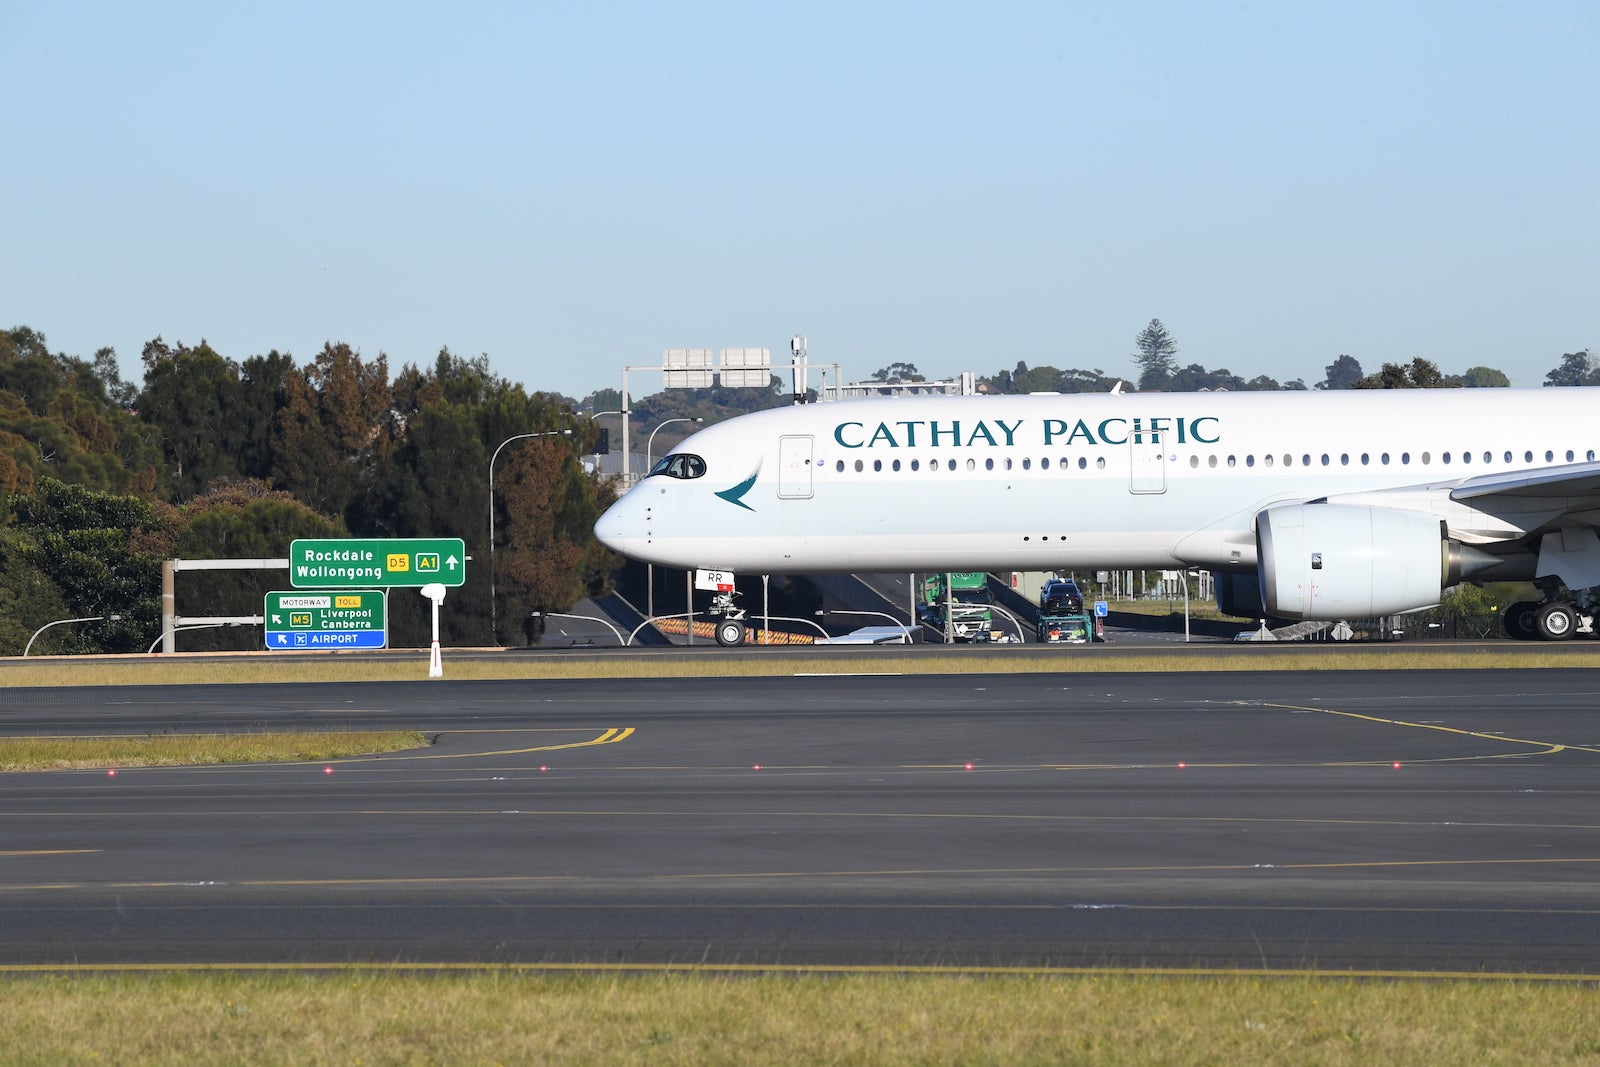 Cathay Pacific A350 on the runway at Sydney Airport